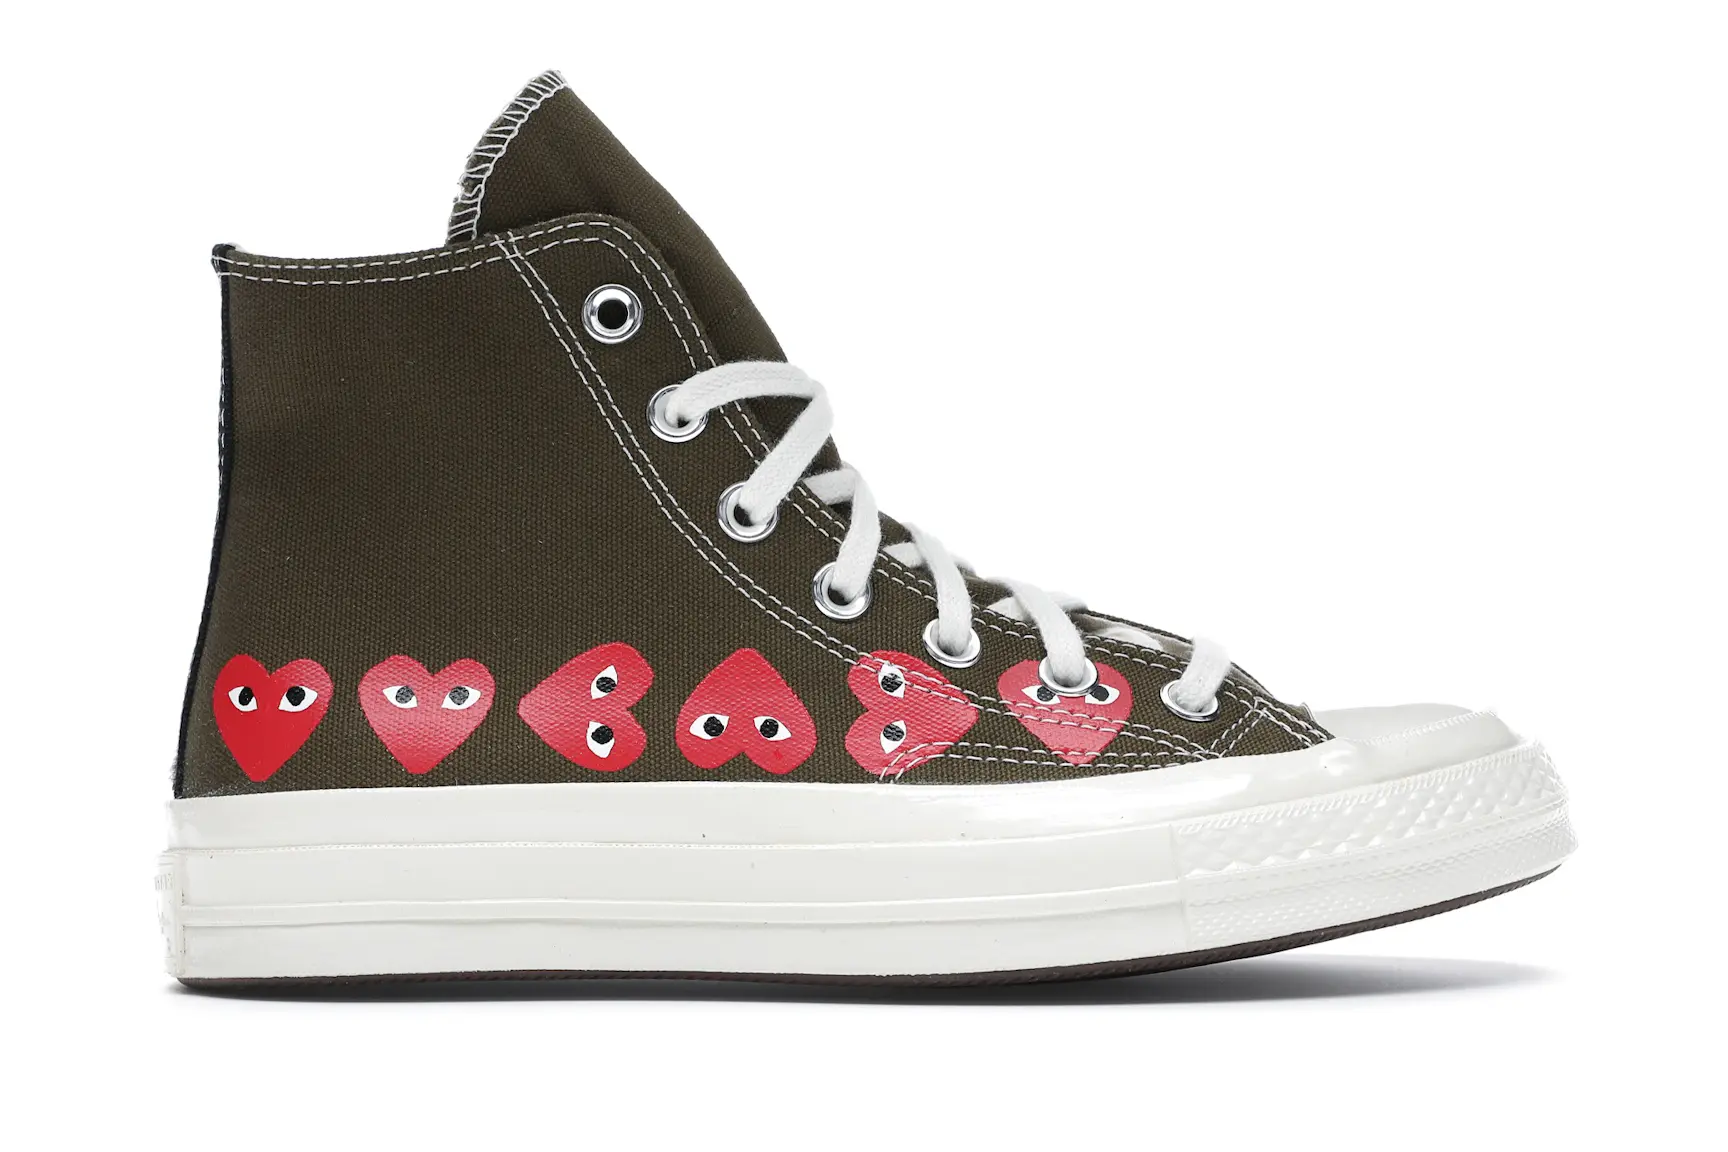 Converse Chuck Taylor All Star 70 Hi Comme des Garcons PLAY Multi-Heart ...